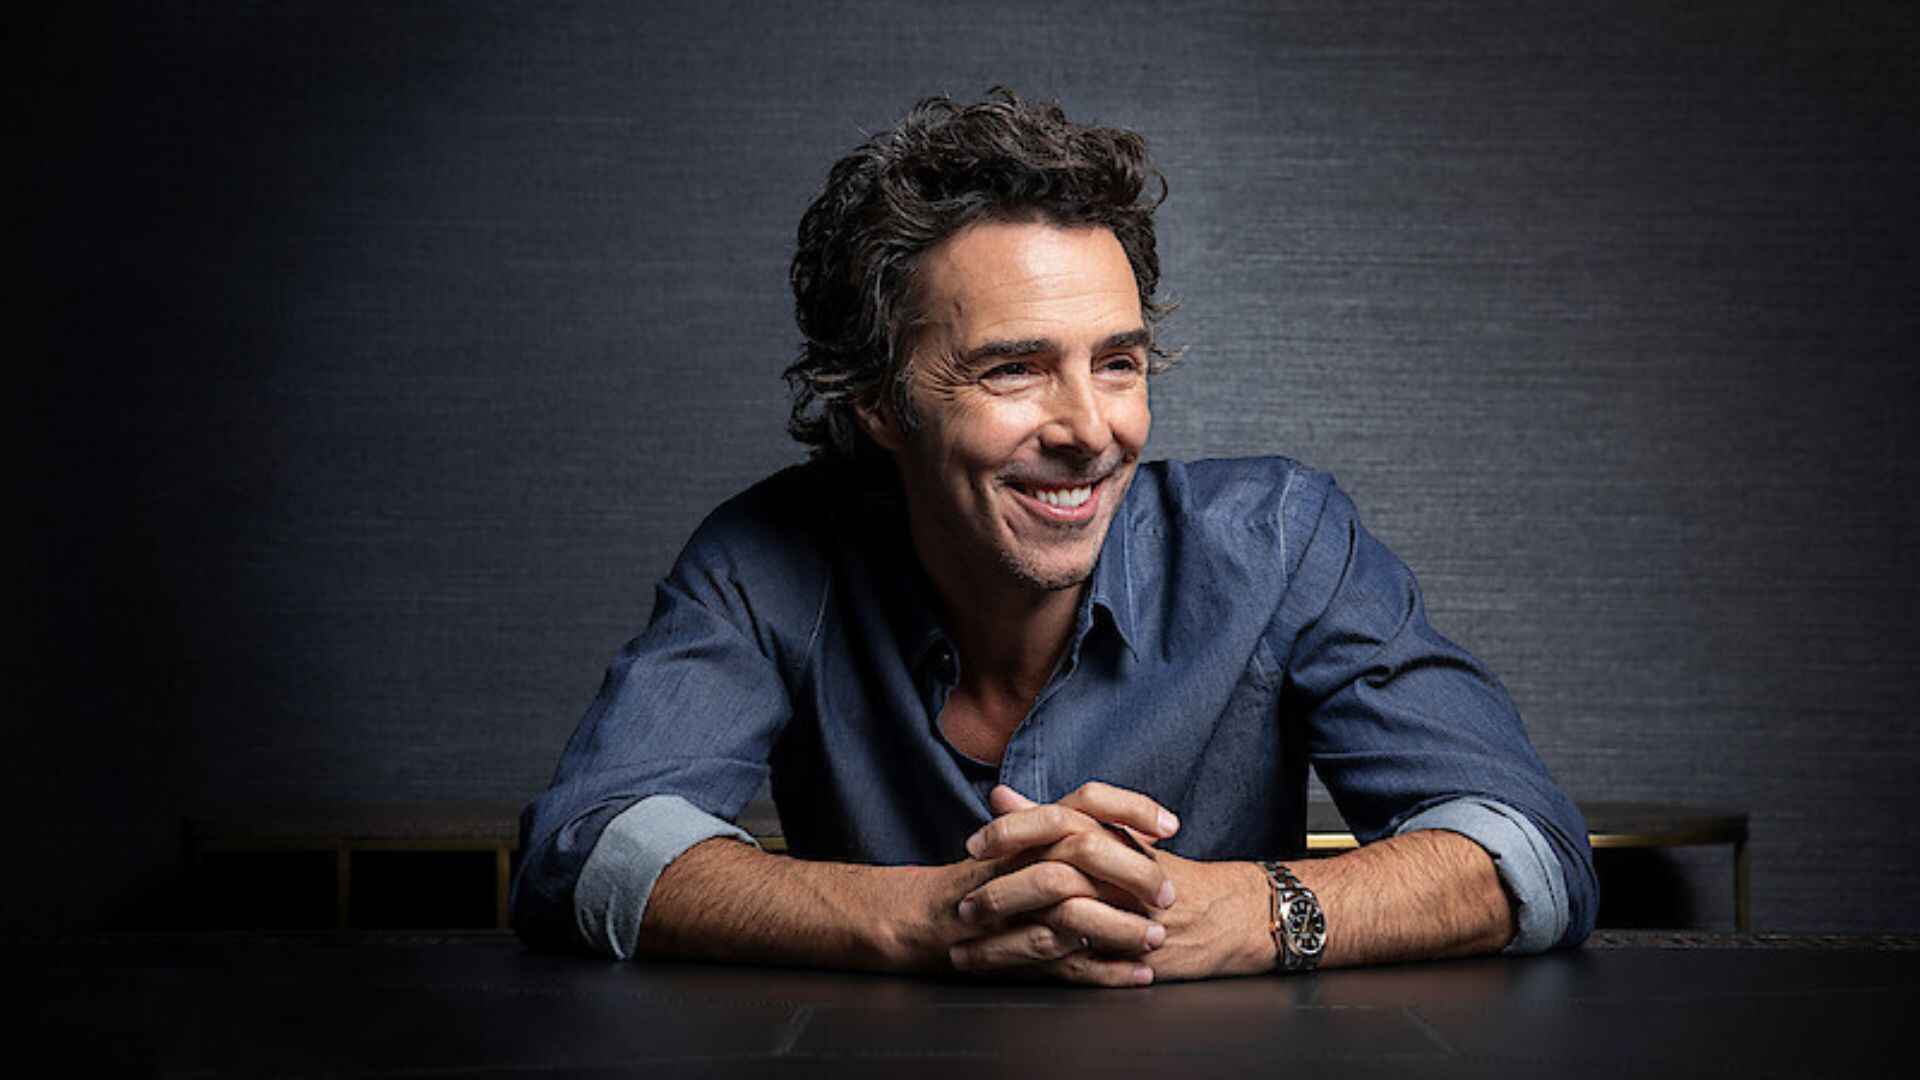 Shawn Levy to step in as the Avengers director after Russos?